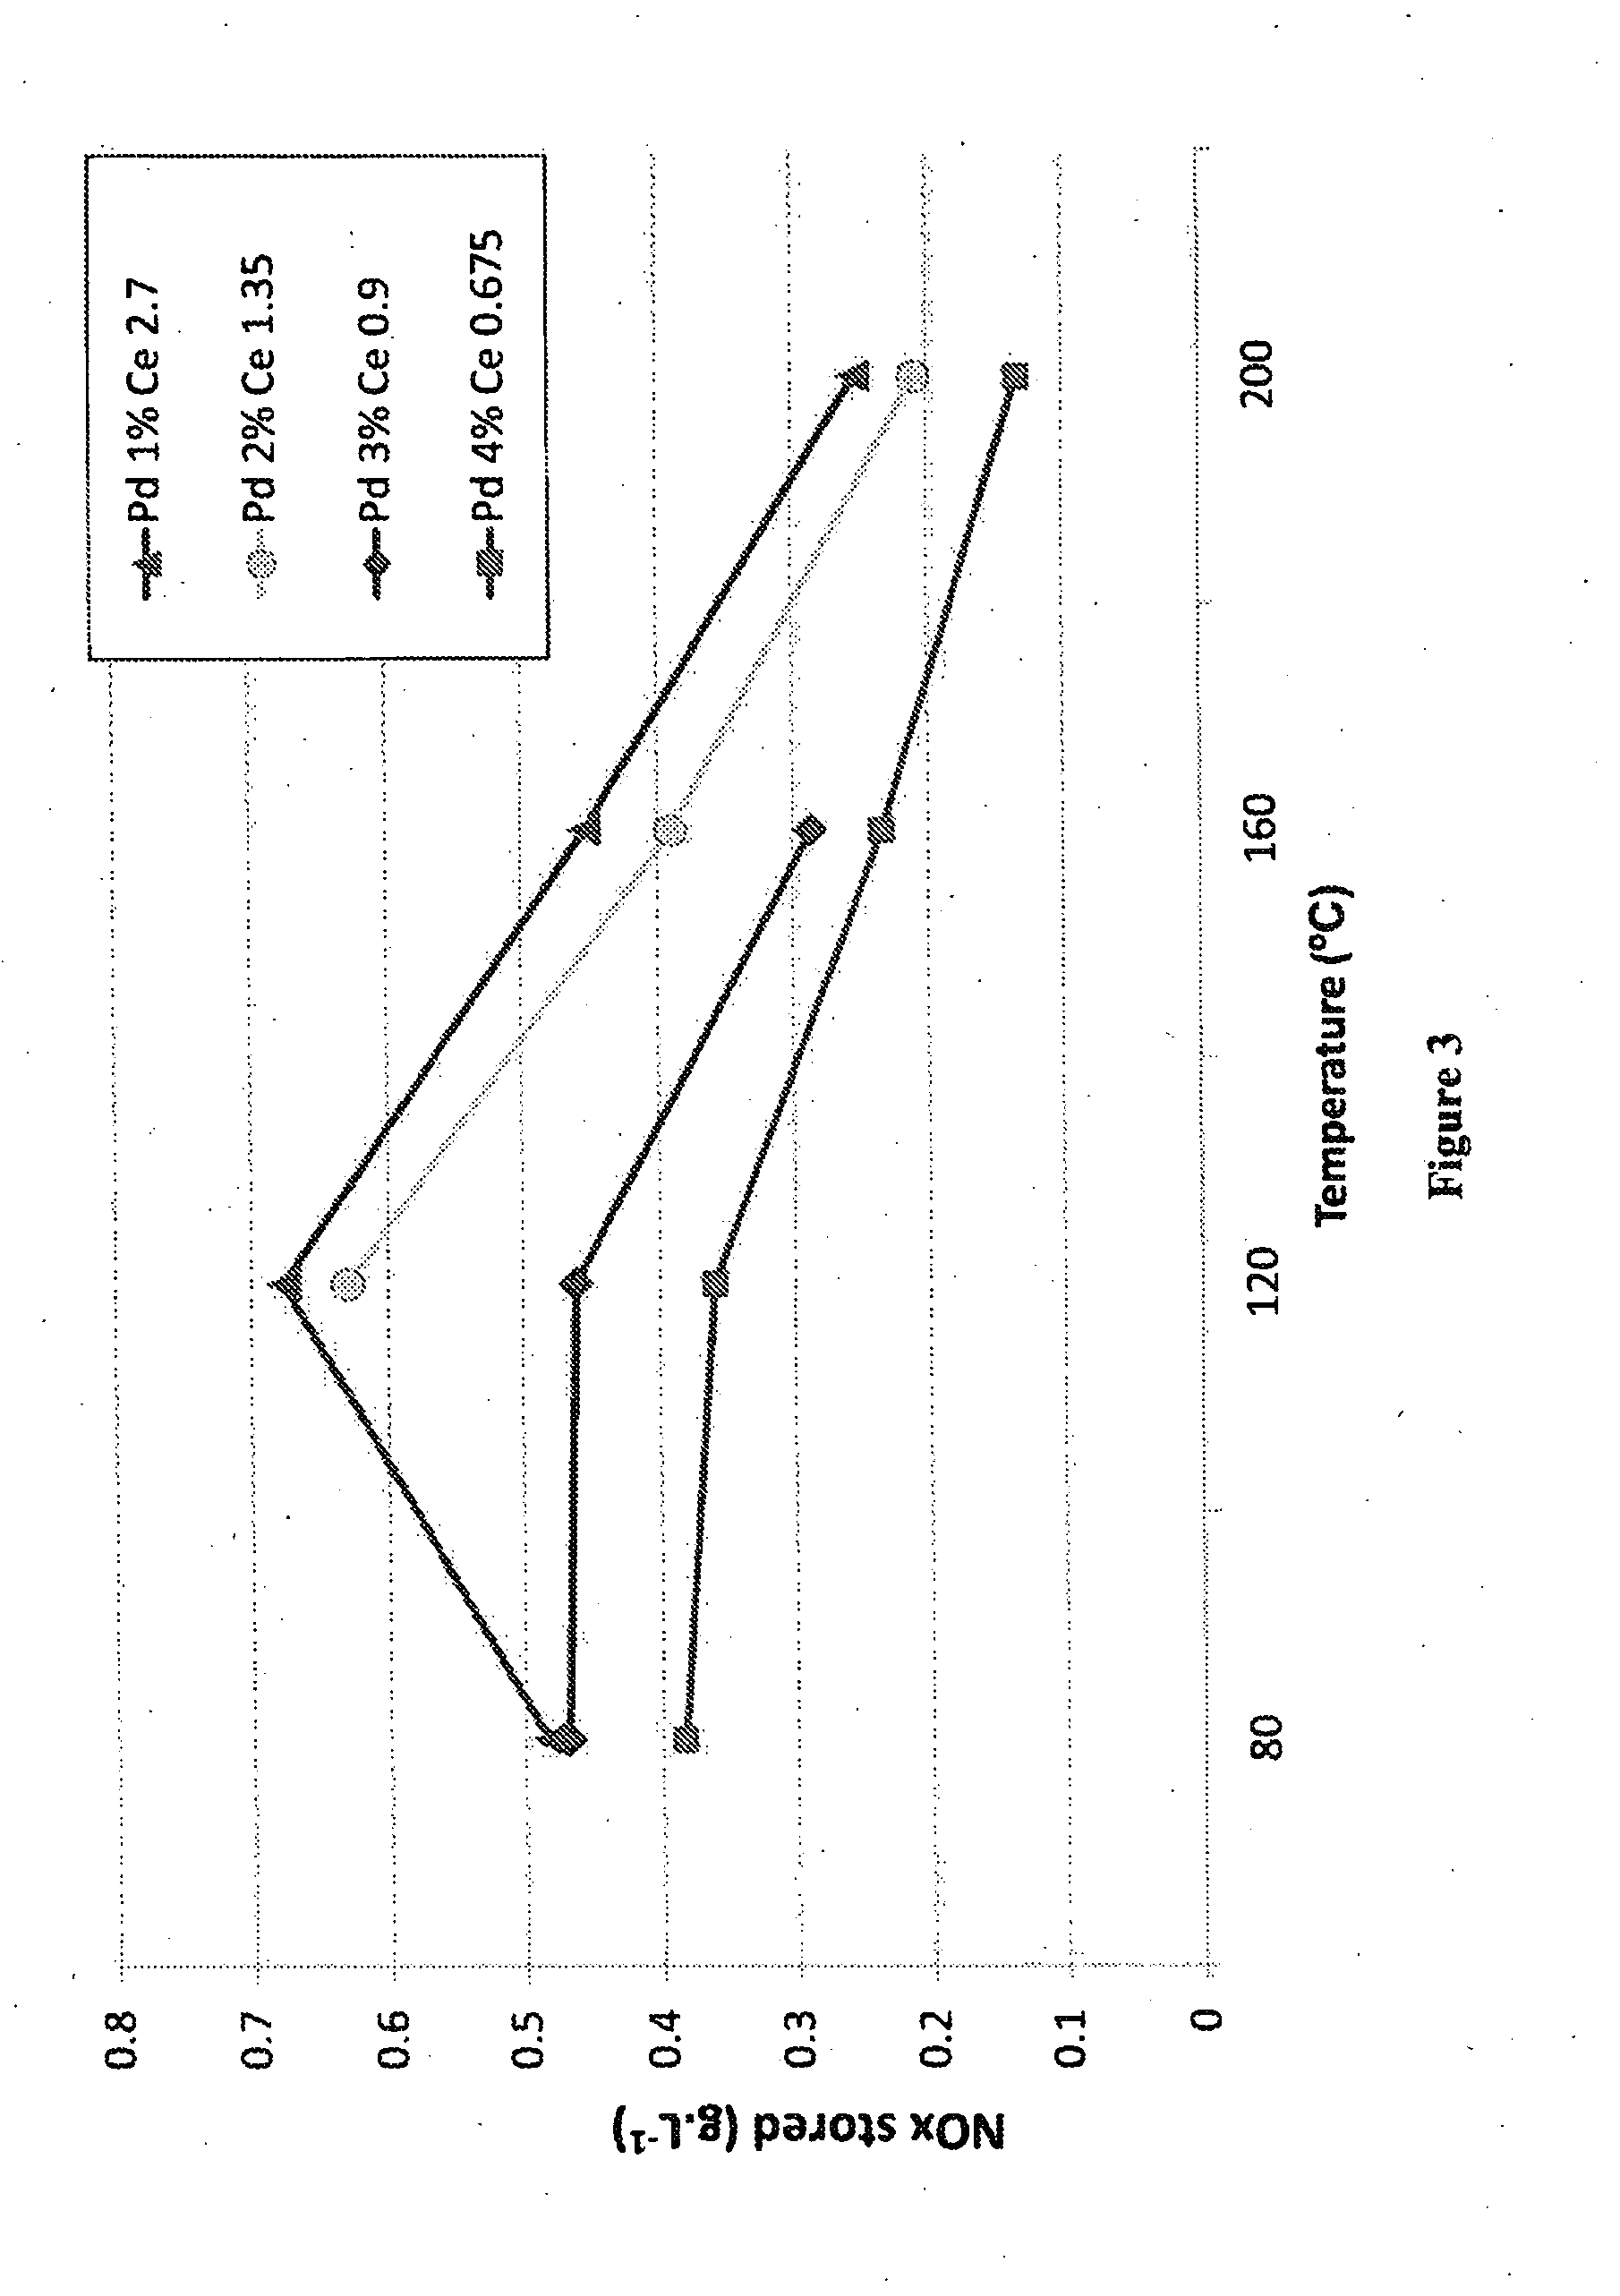 Oxidation Catalyst for a Compression Ignition Engine